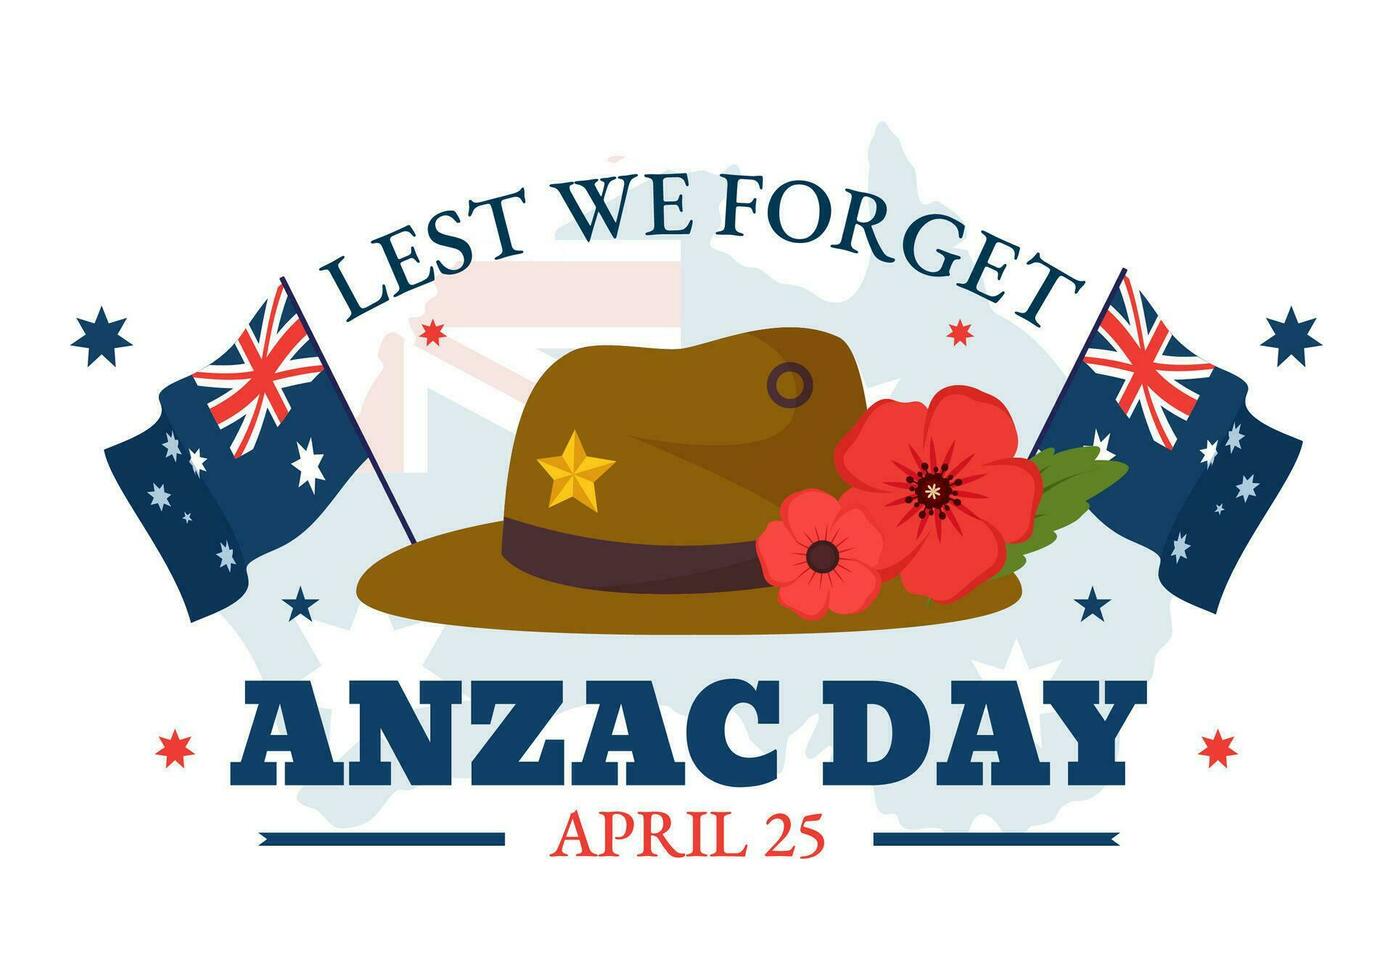 Anzac Day of Lest We Forget Vector Illustration on 25 April with Remembrance Soldier Paying Respect and Red Poppy Flower in Flat Cartoon Background